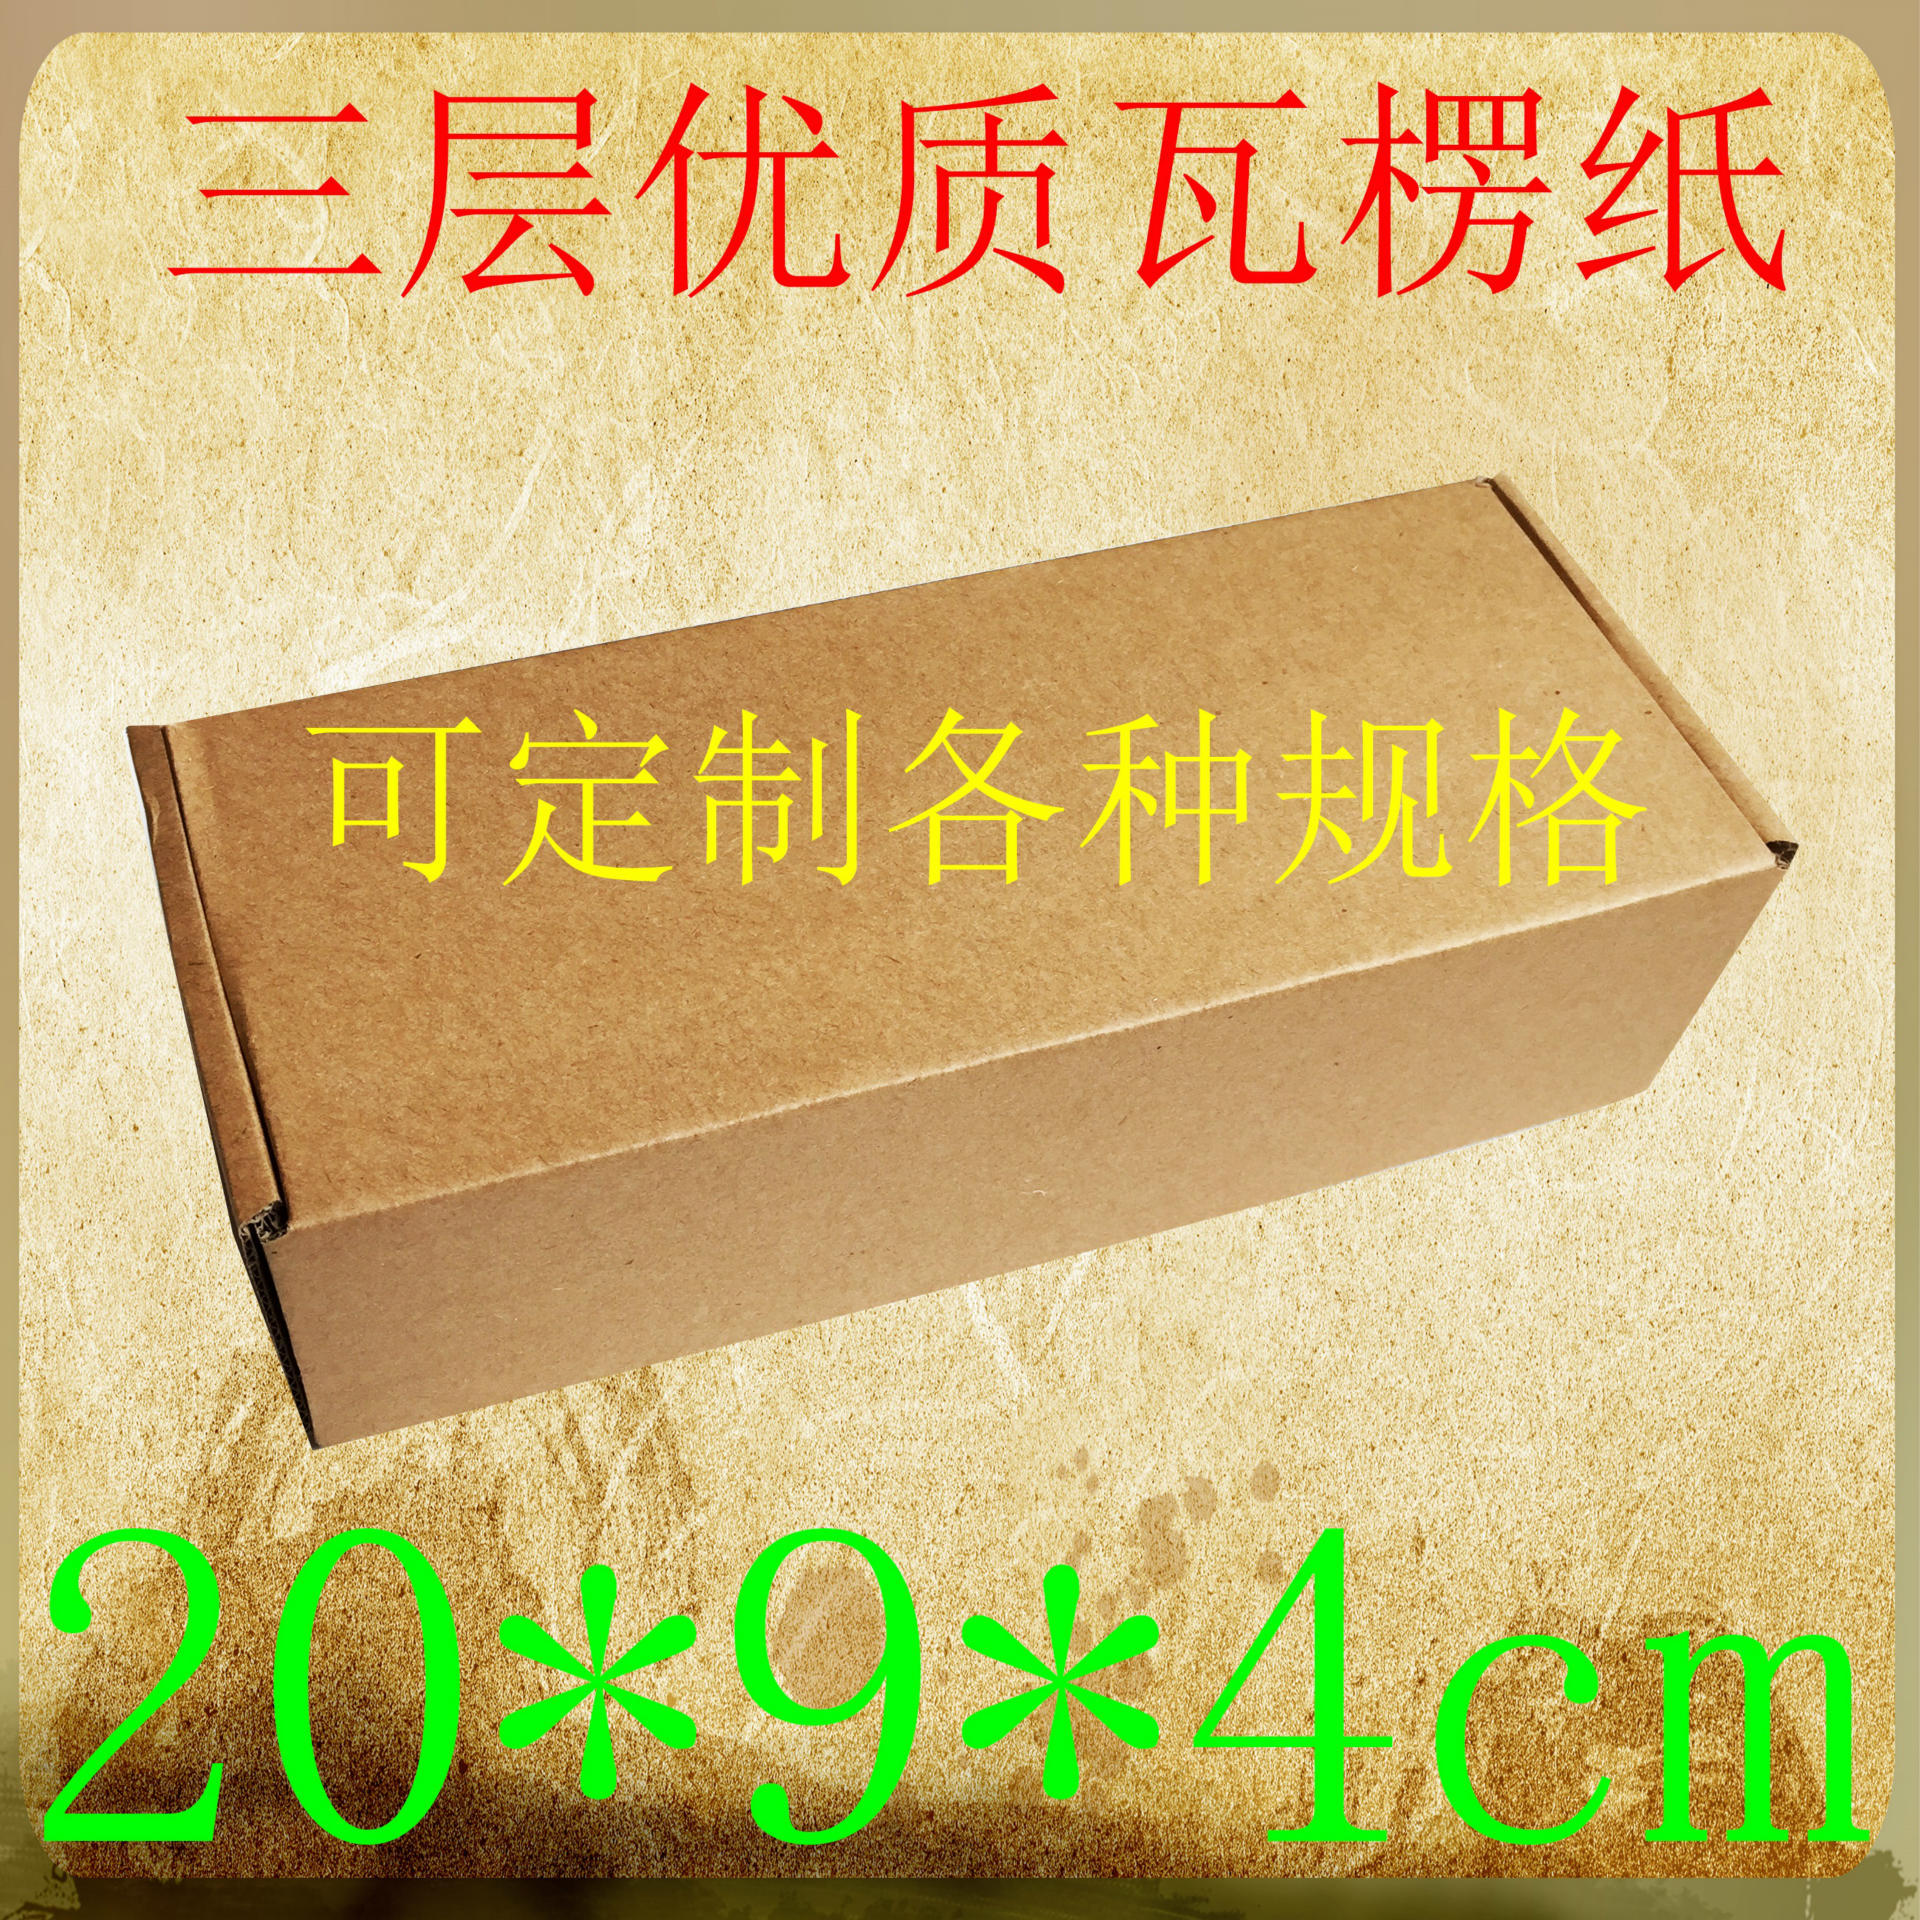 goods in stock 20*9*4 Glasses box express aircraft Carton Underwear packaging men and women Socks Packaging box